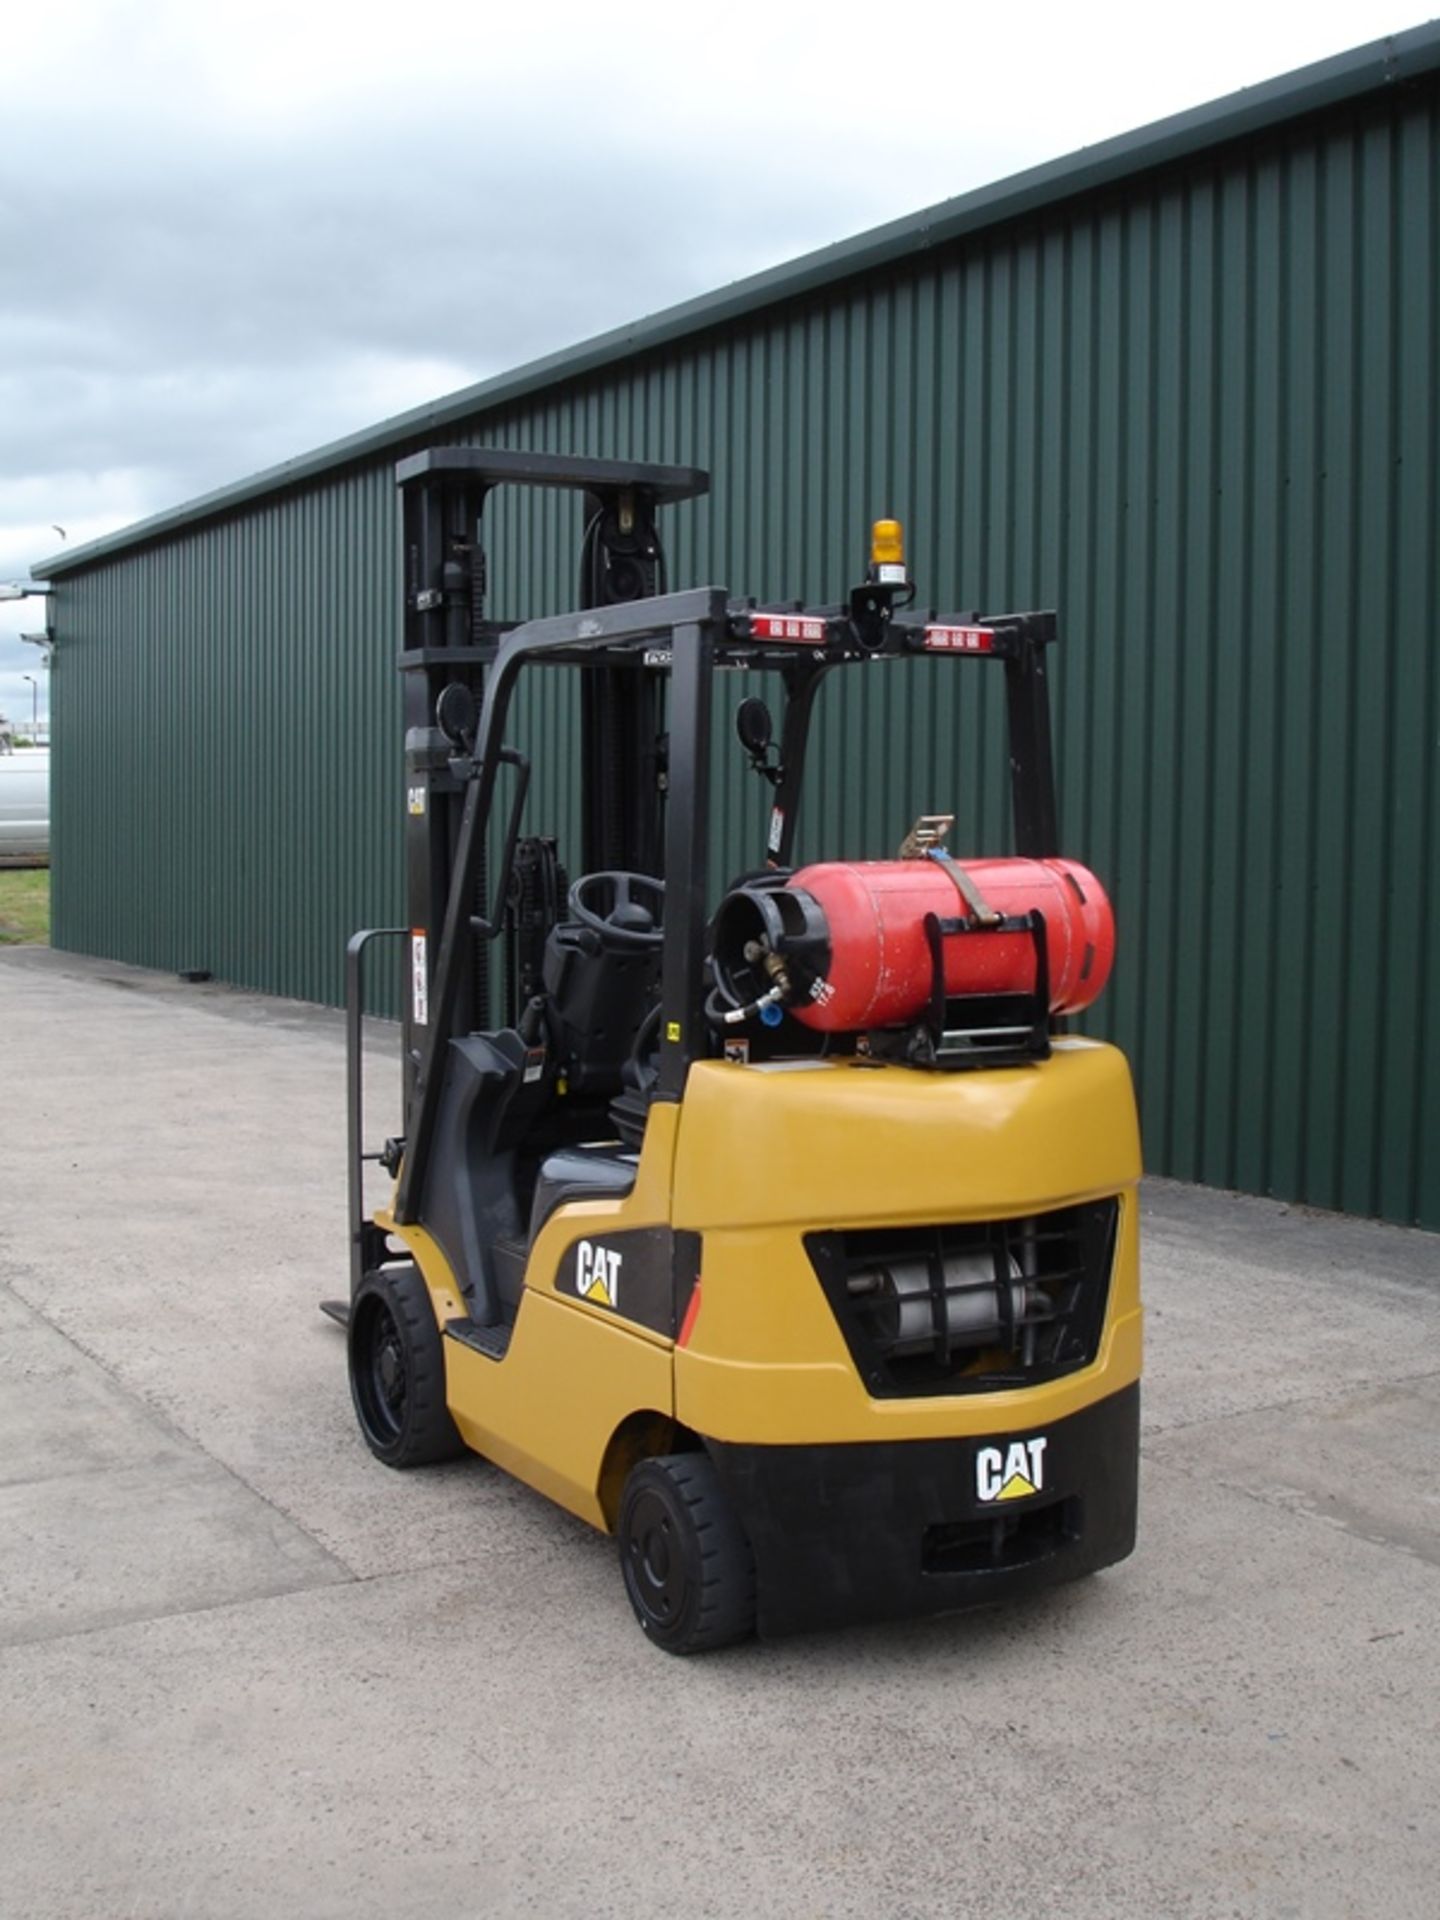 Caterpillar 2 Ton Compact Forklift (2014) - Image 2 of 8